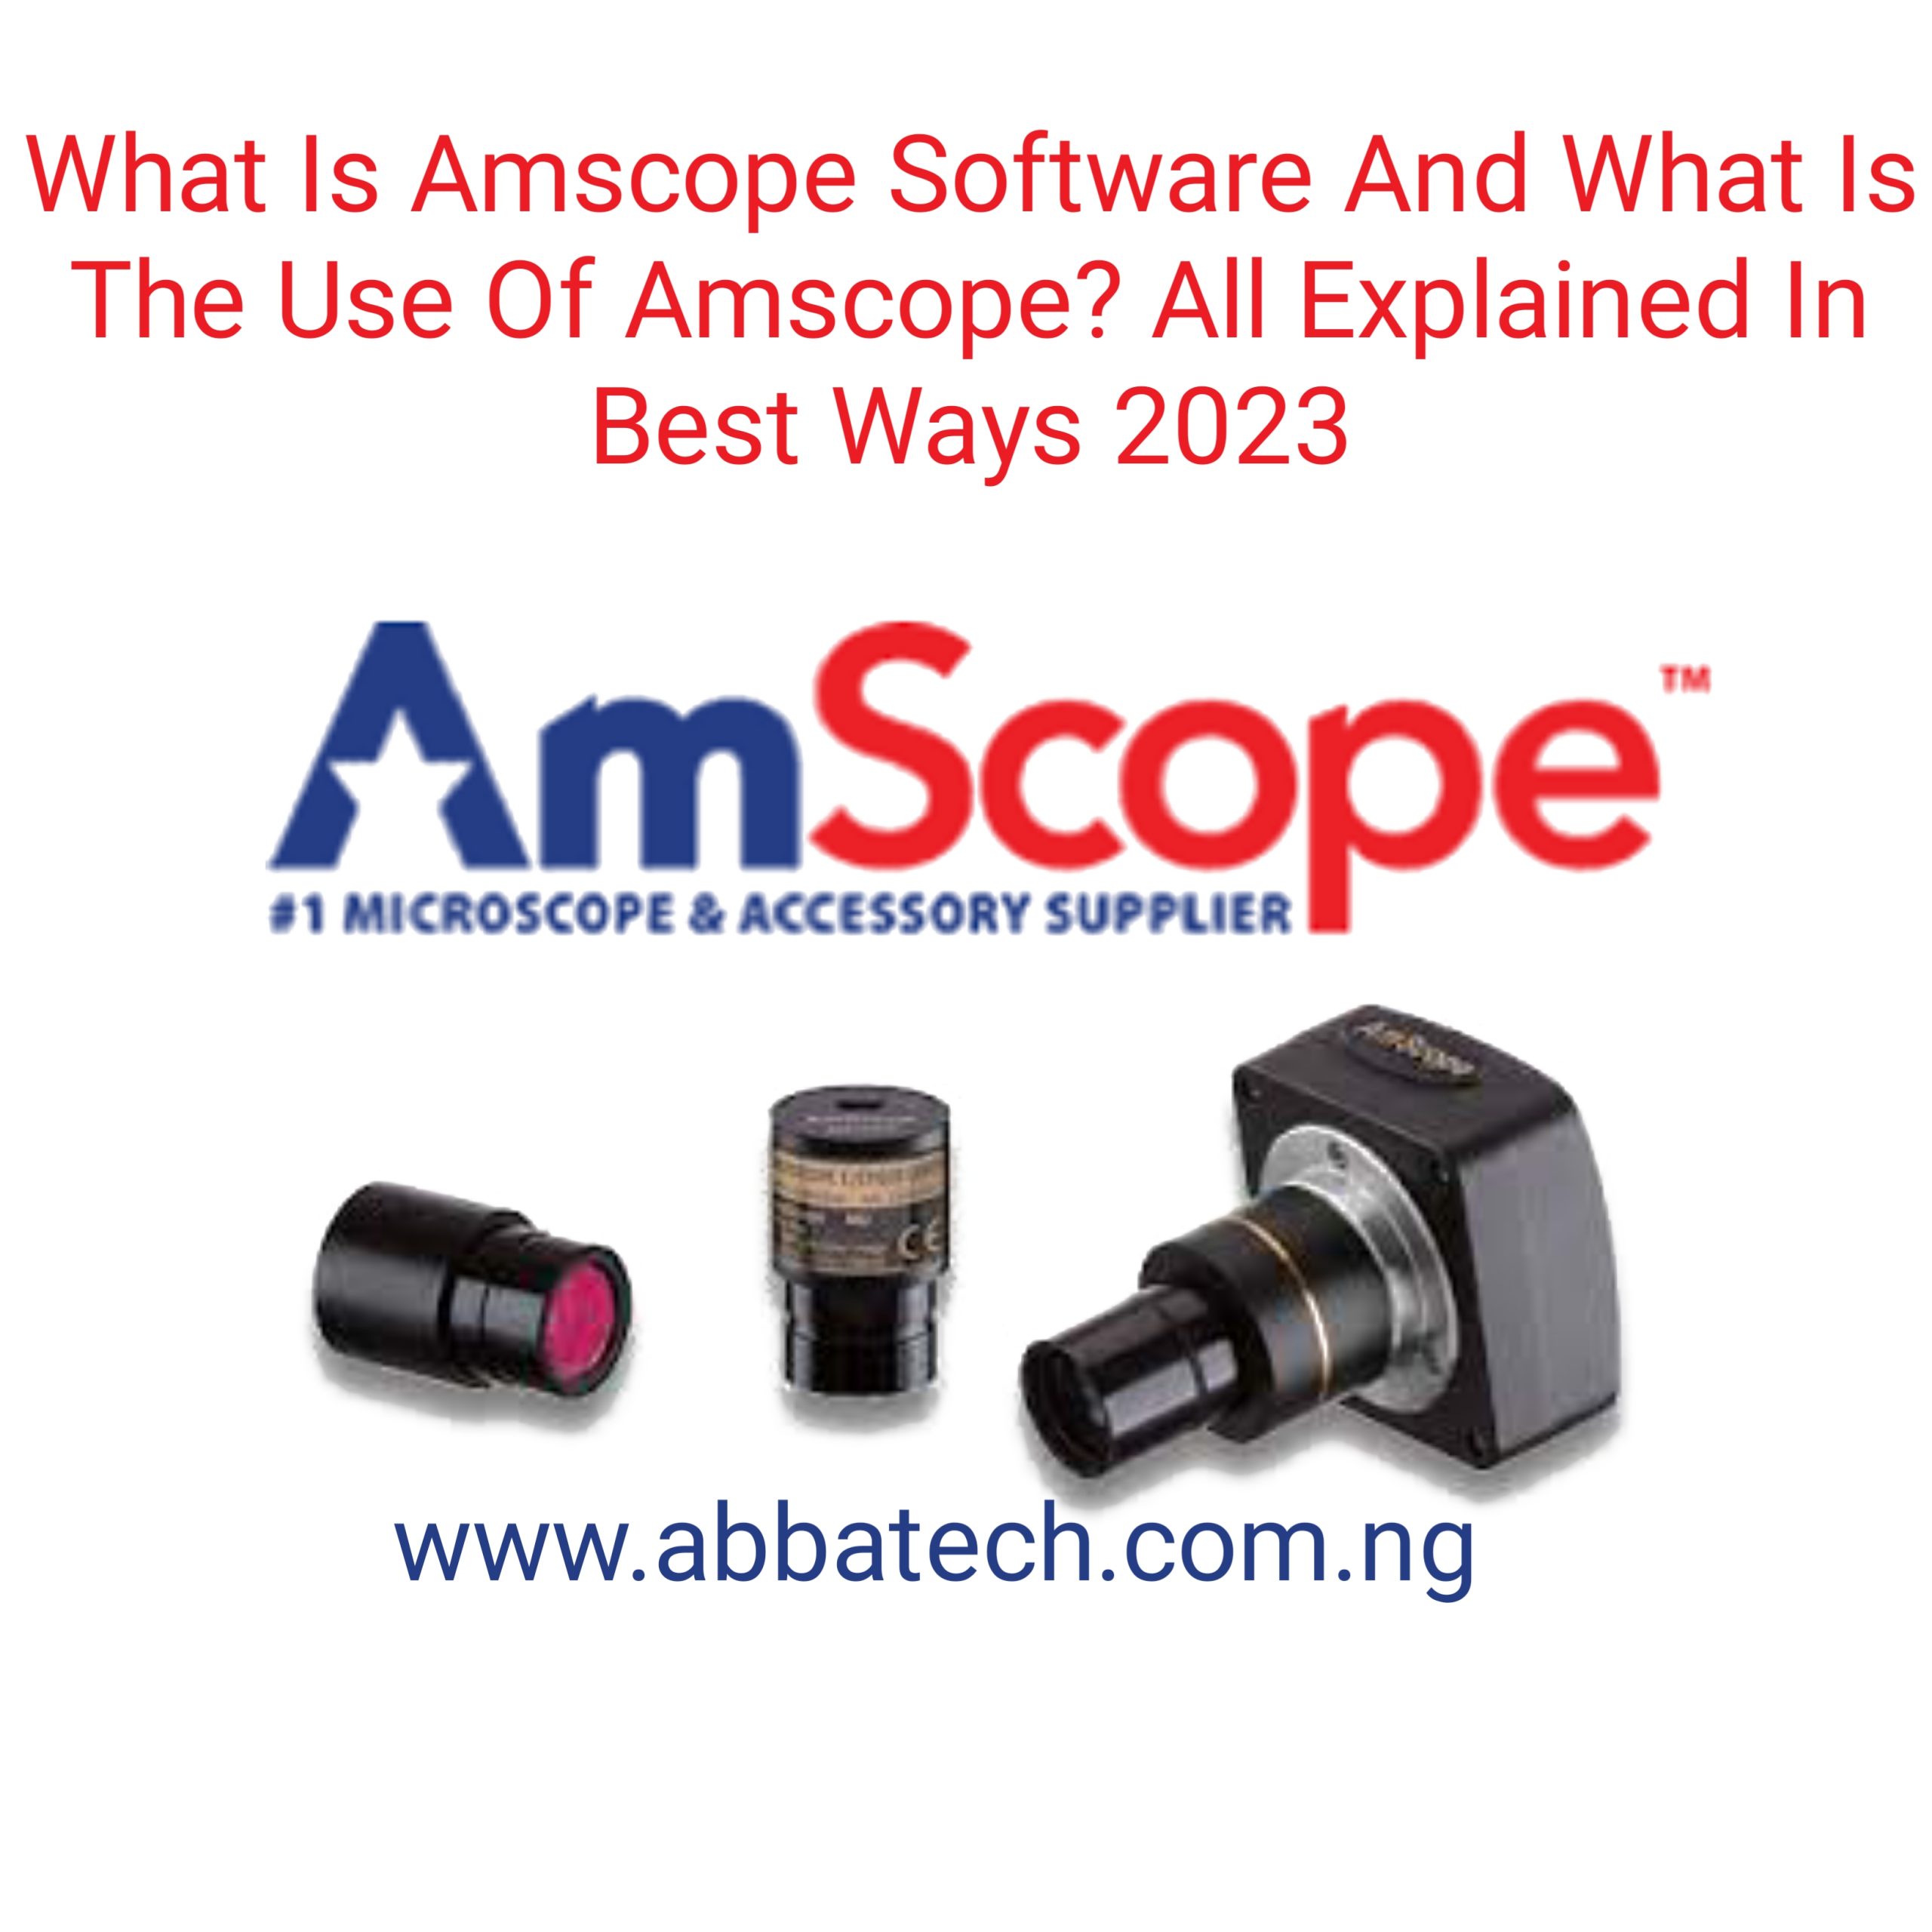 What Is Amscope Software And What Is The Use Of Amscope? All Explained In Best Ways 2023